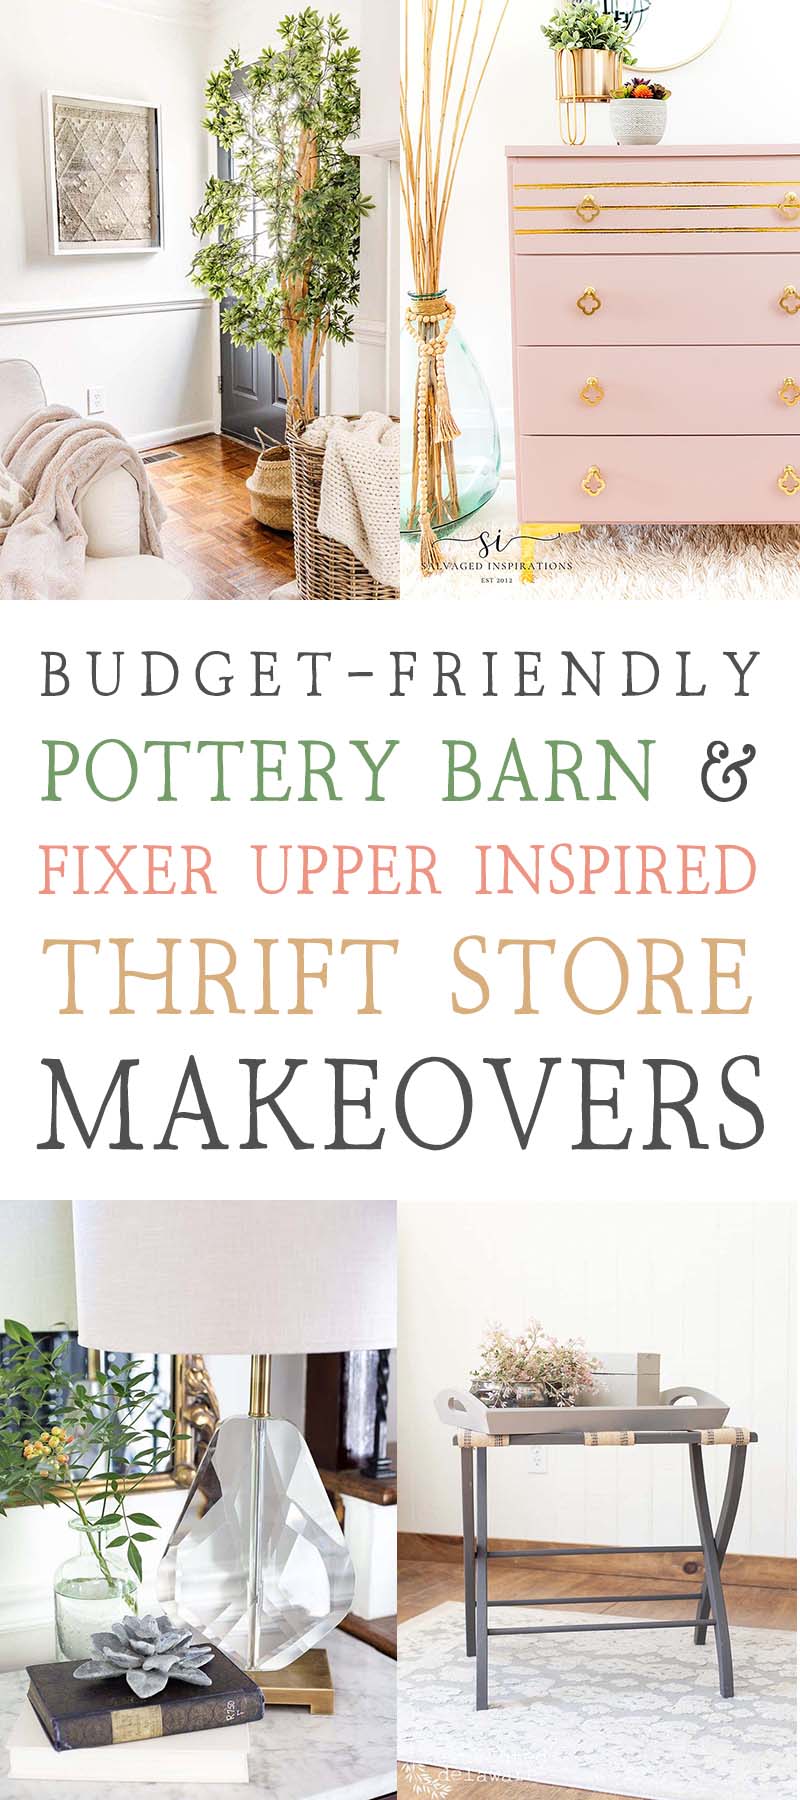 Barn and Fixer Upper Inspired Thrift Store Makeovers